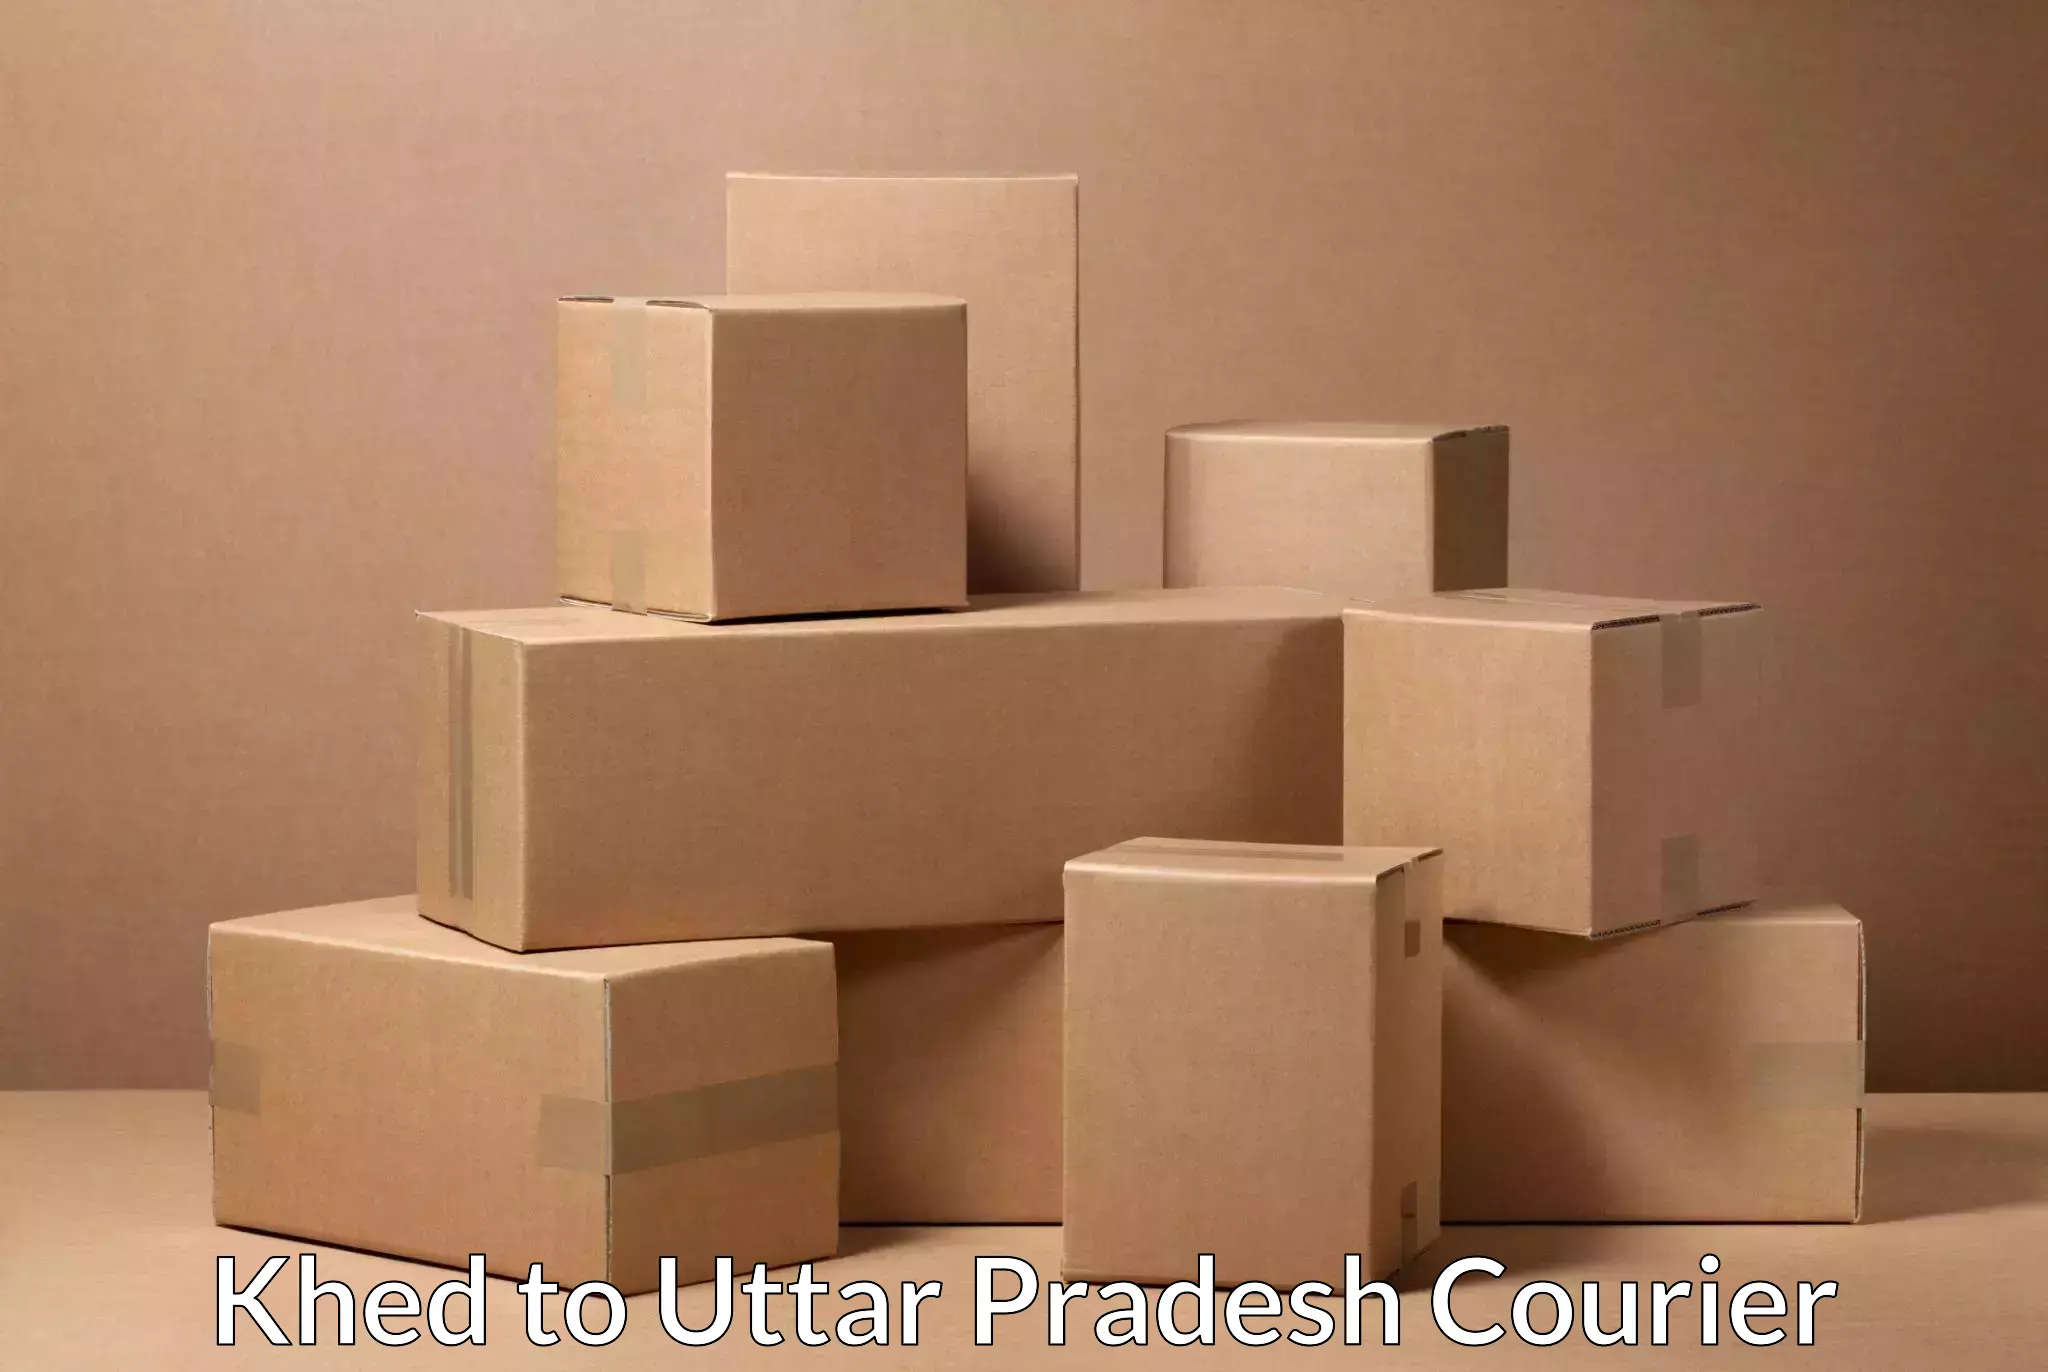 Online courier booking Khed to Uttar Pradesh